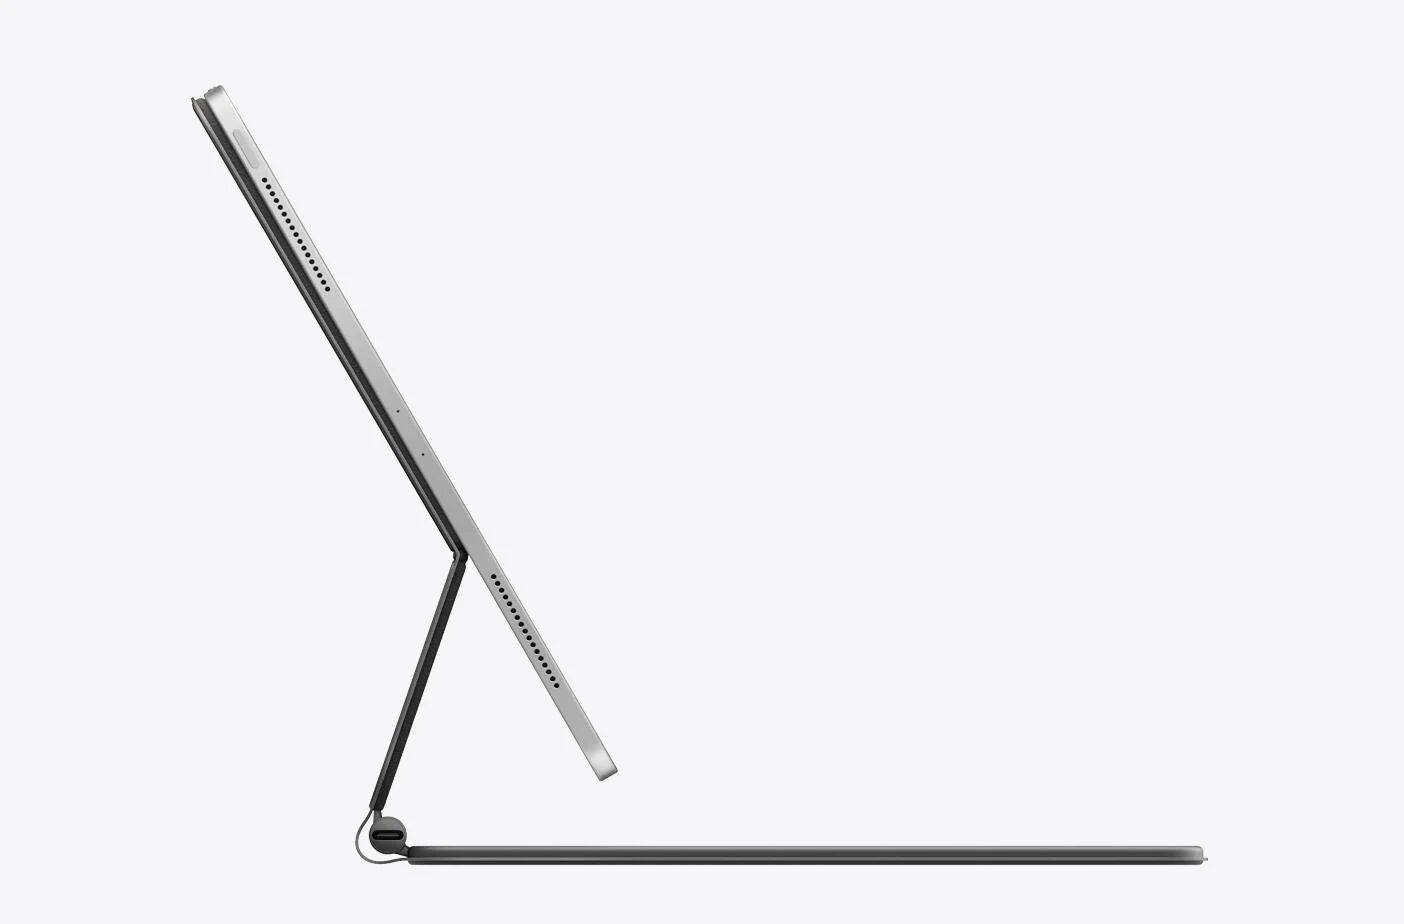 iPad Pro users are experiencing battery issues, apparently becuase of the new Magic Keyboard